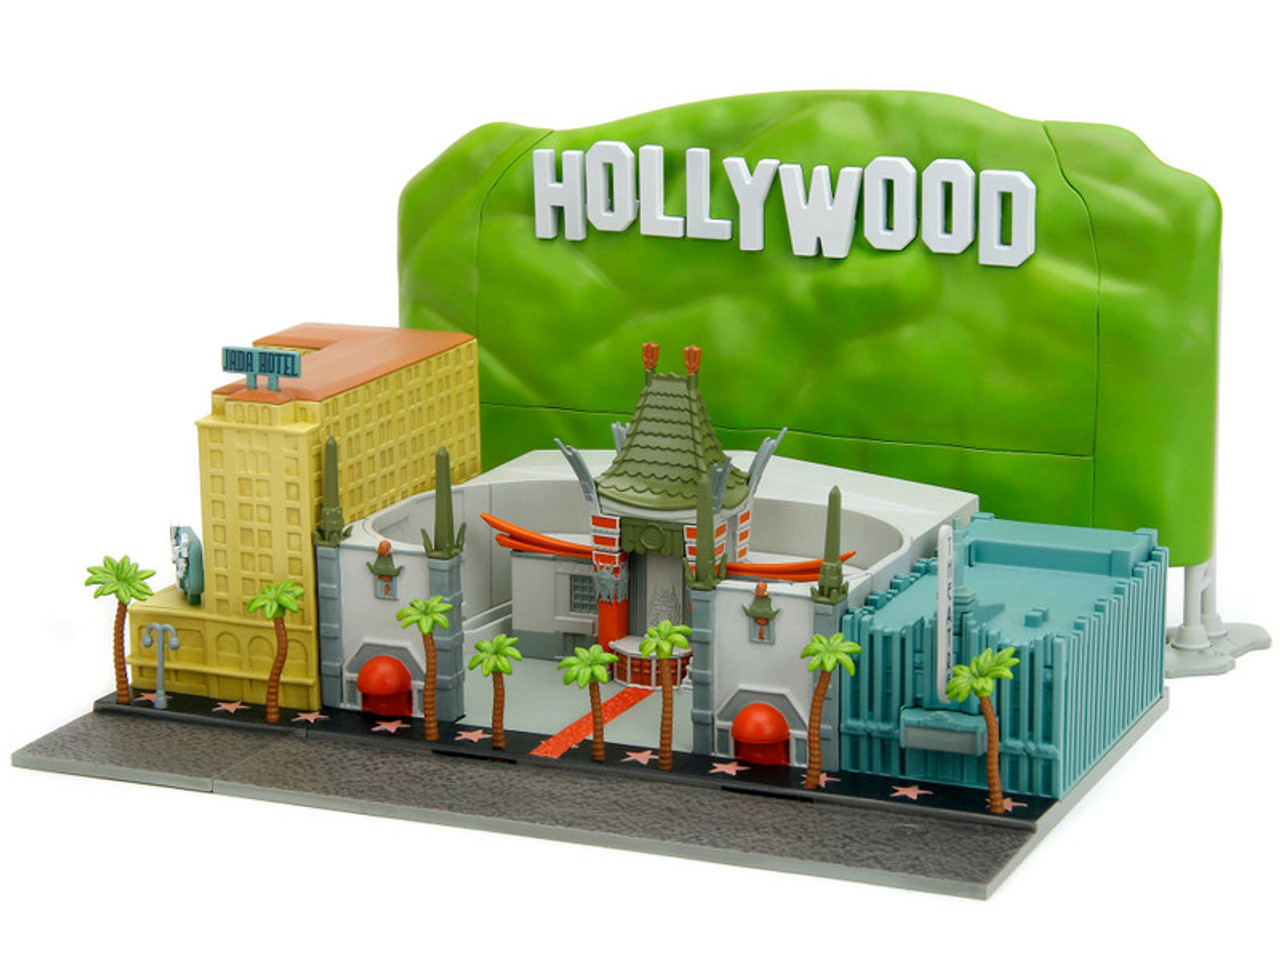 "Hollywood 100" Walk of Fame Diorama with Pink Convertible and Double-Decker Bus "Nano Scene" Series model by Jada